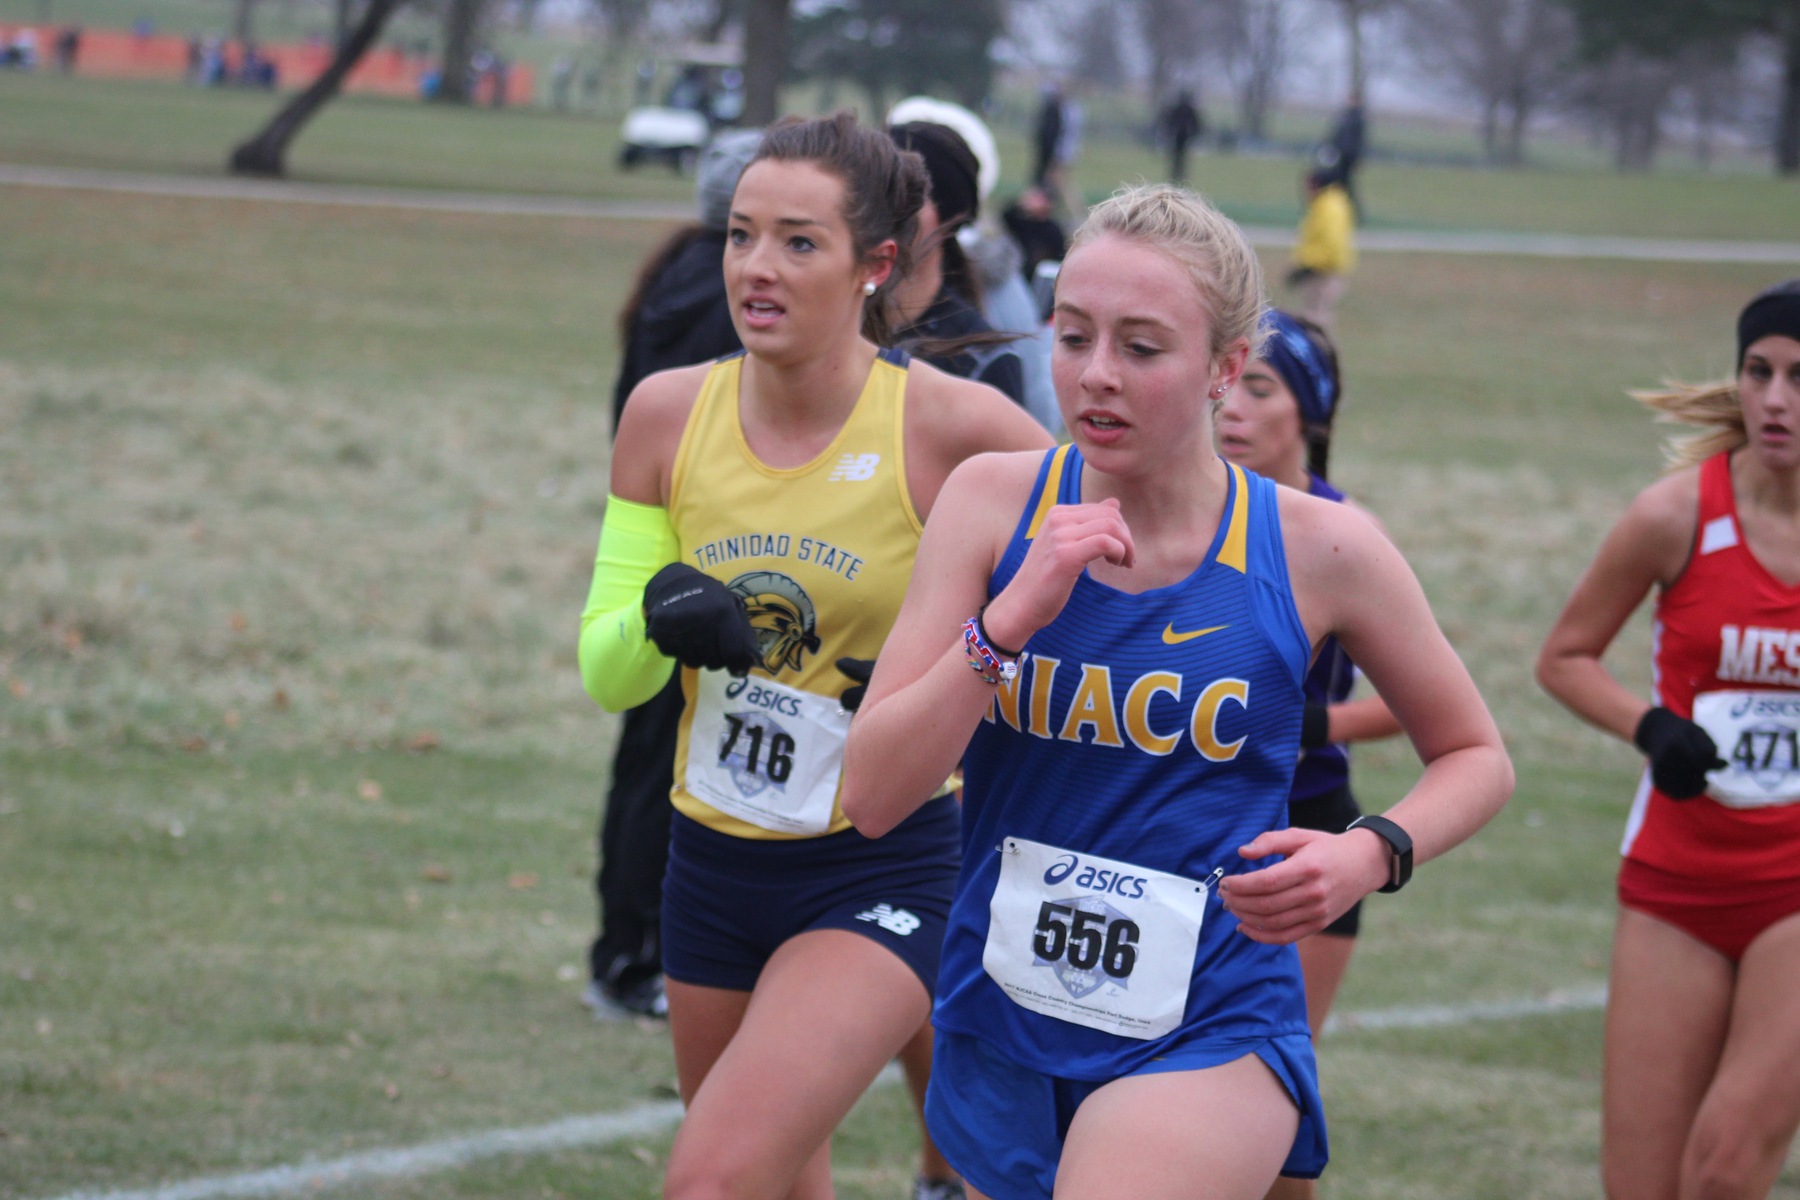 NIACC's Julia Dunlavey runs at the national meet in Fort Dodge on Saturday.